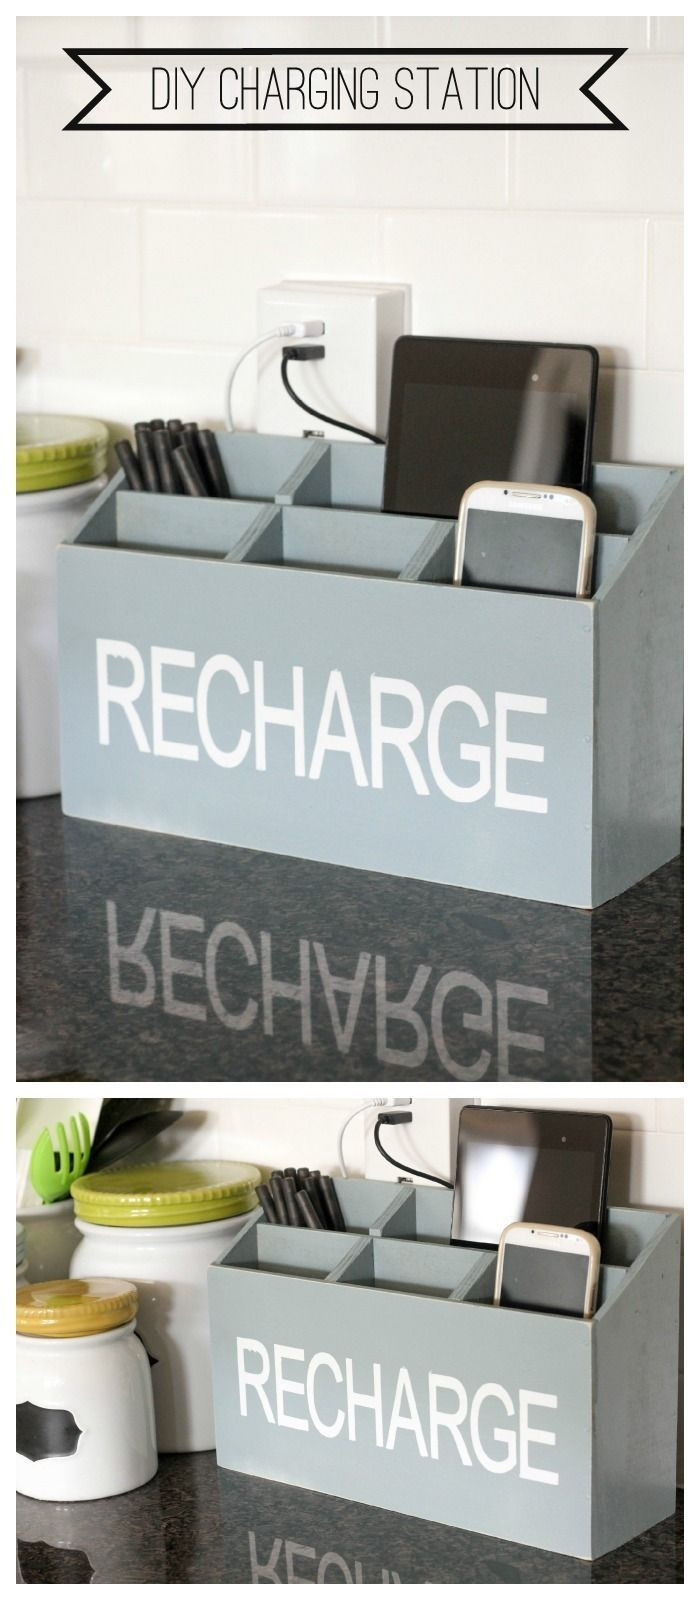 Charger Organizer DIY
 25 best ideas about Charger organization on Pinterest